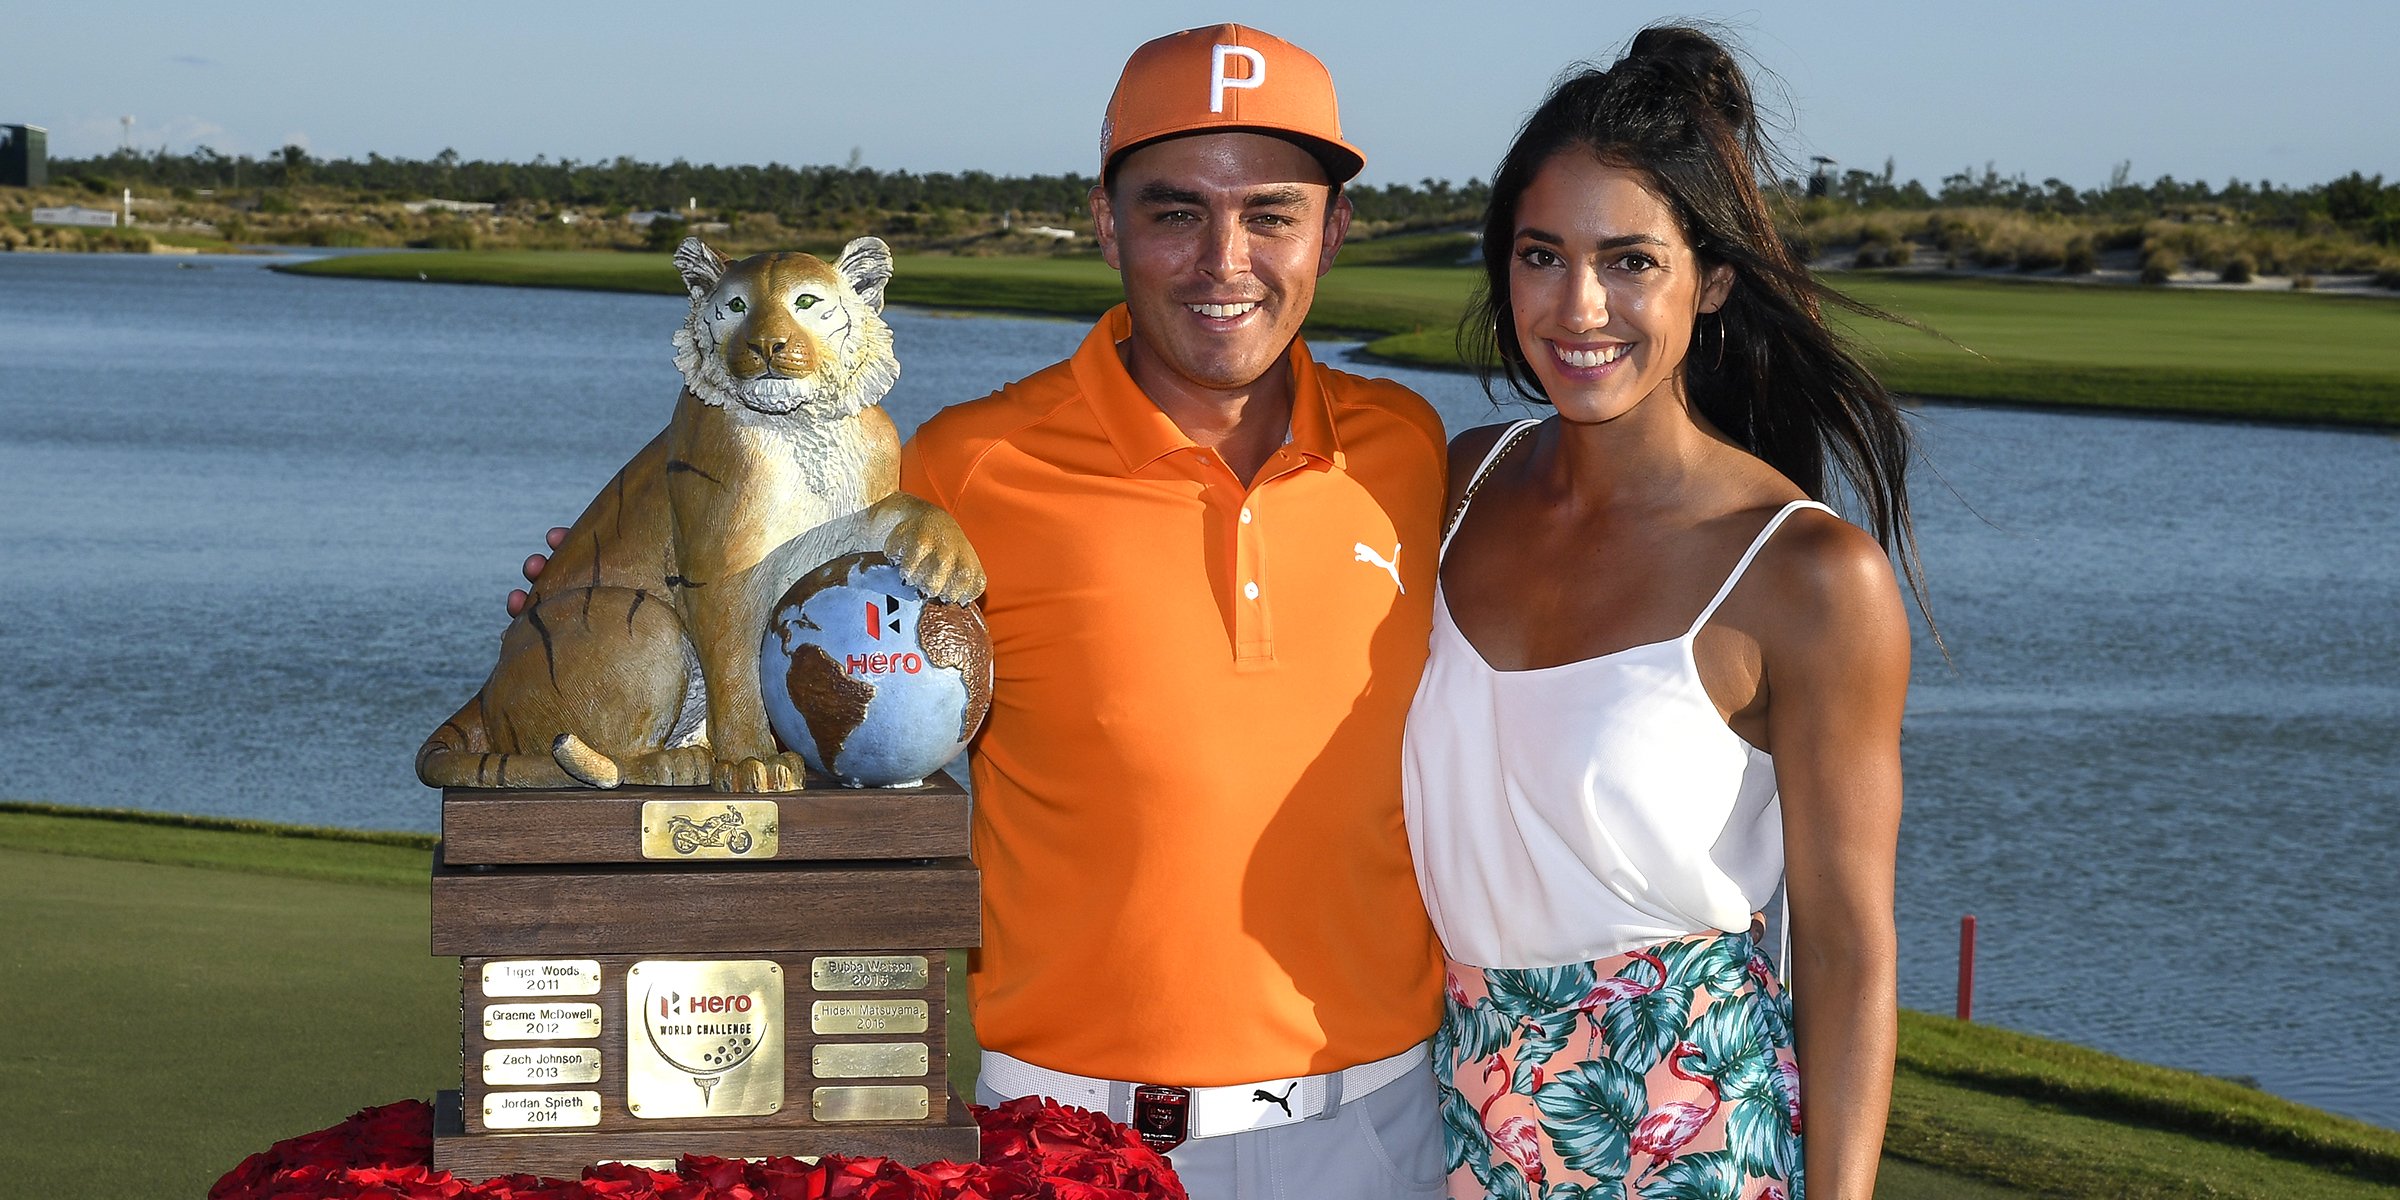 Rickie Fowler and Allison Stokke | Source: Getty Images